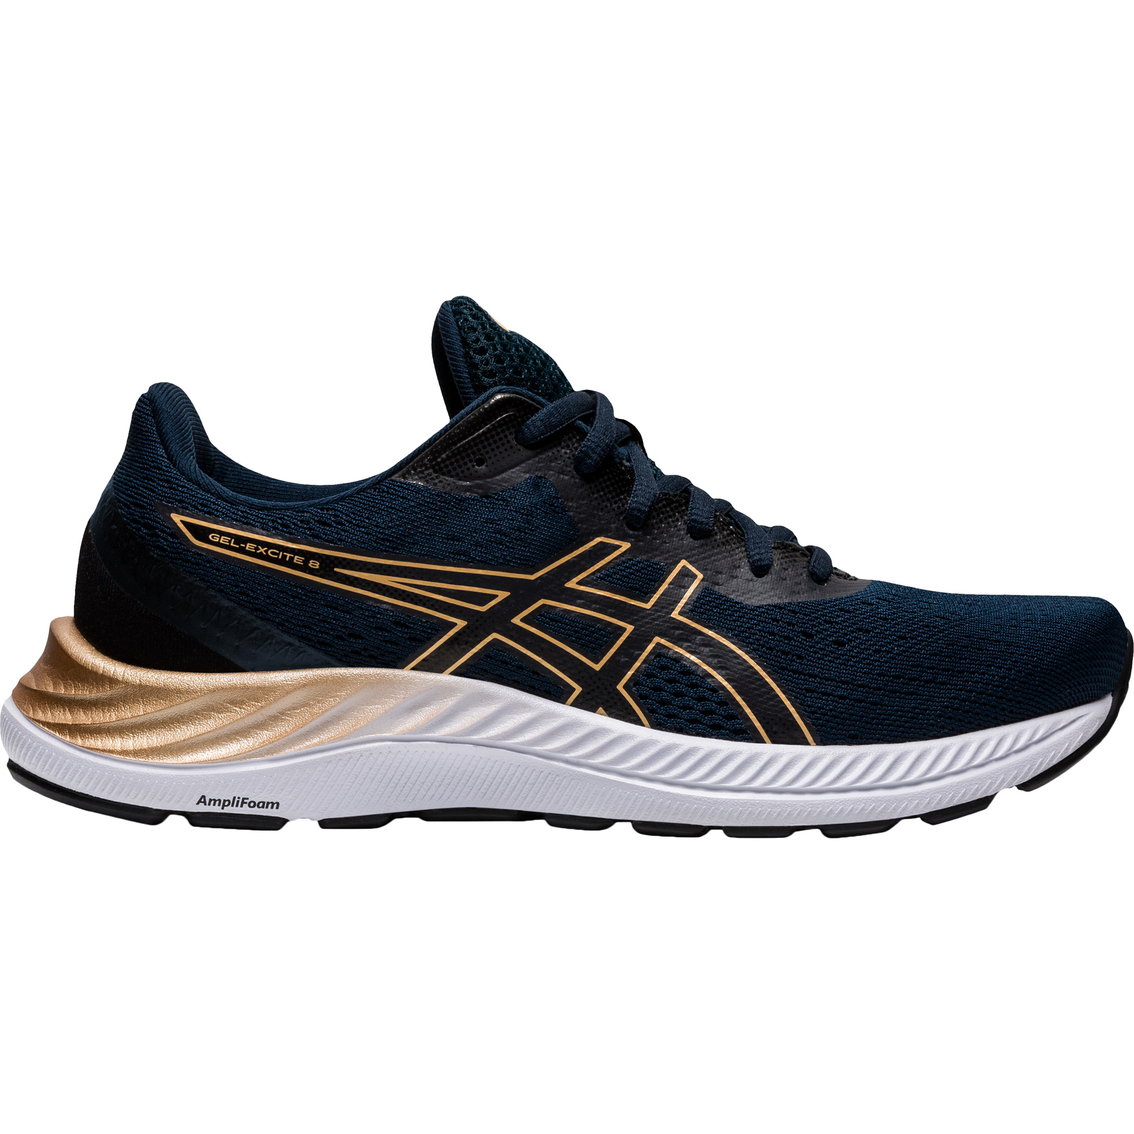 ASICS Women's Gel Excite 8 Running Shoes - Image 3 of 7